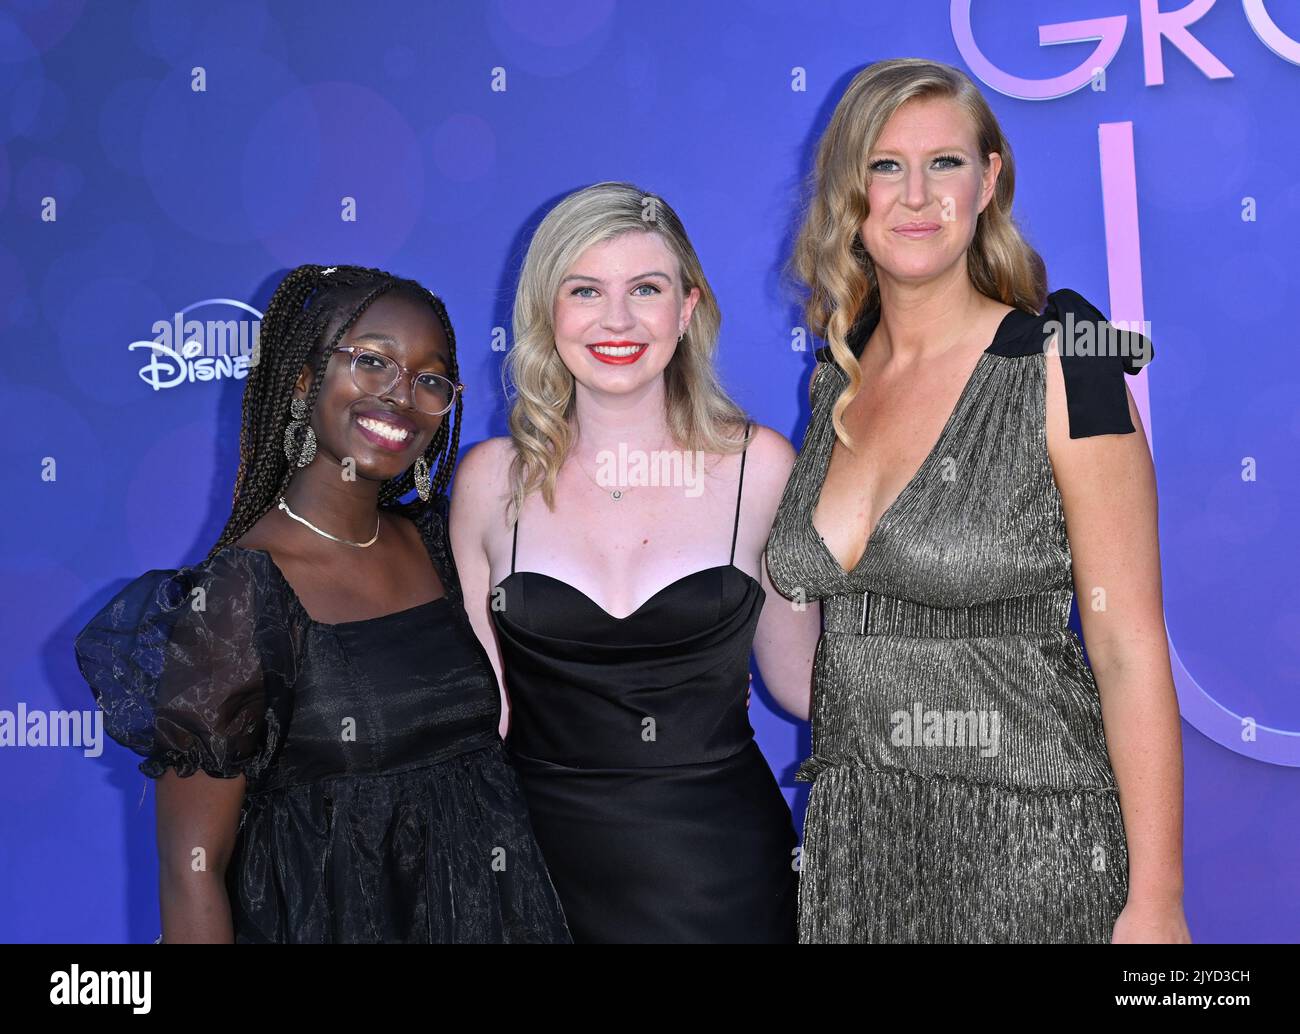 Los Angeles, USA. 07th Sep, 2022. LOS ANGELES, USA. September 07, 2022: Sofia Ongele, Alex Crotty & Nicole Galovski at the premiere for Disney  'Growing Up' at Neuhouse, Hollywood. Picture Credit: Paul Smith/Alamy Live News Stock Photo